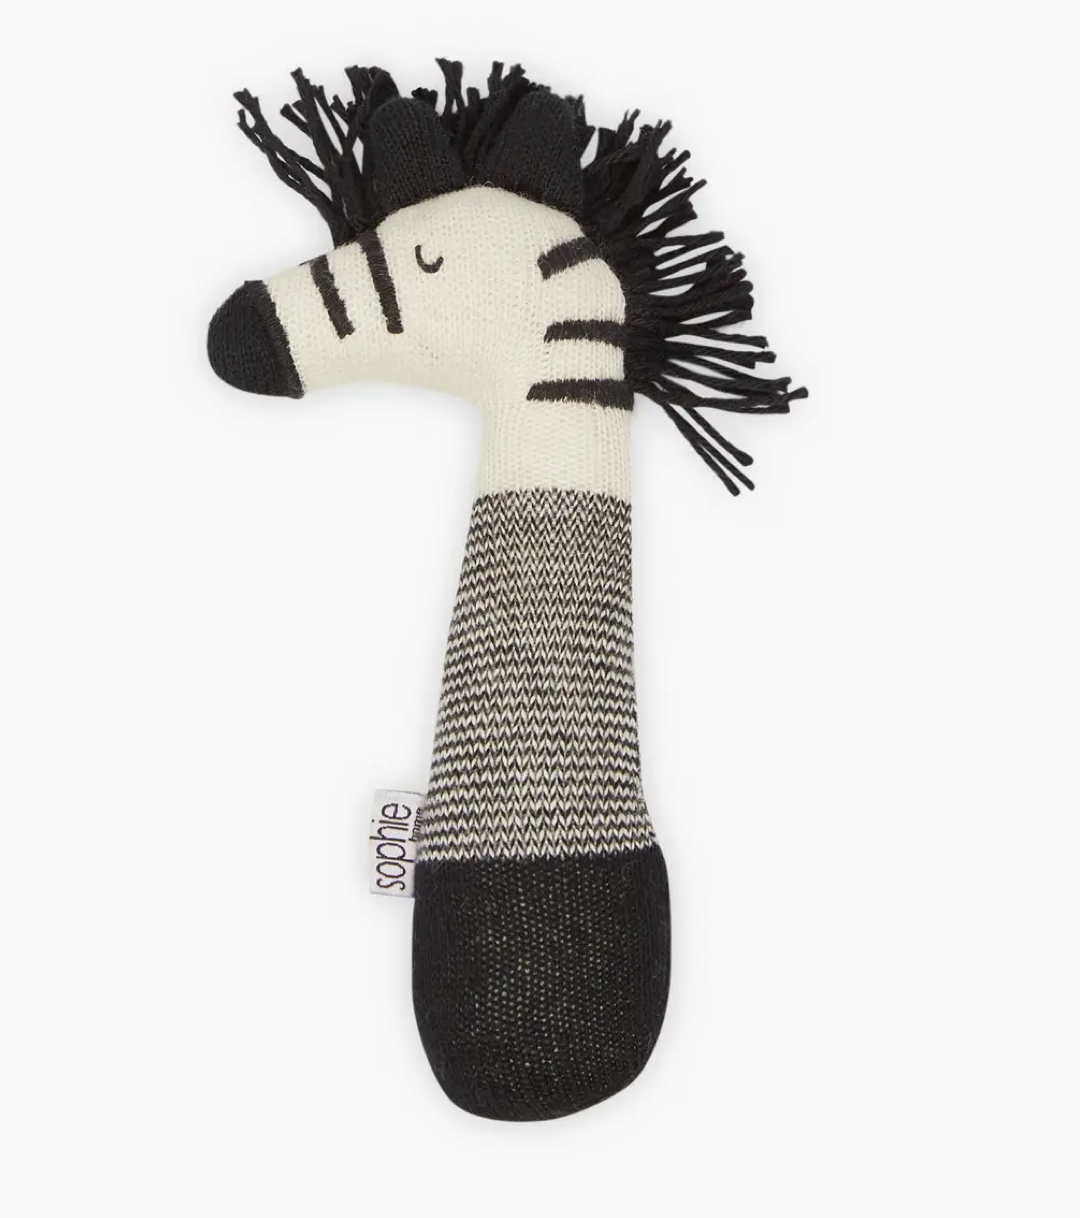 Sophie Home - Cotton Knit Baby Rattle Toy - Zebra